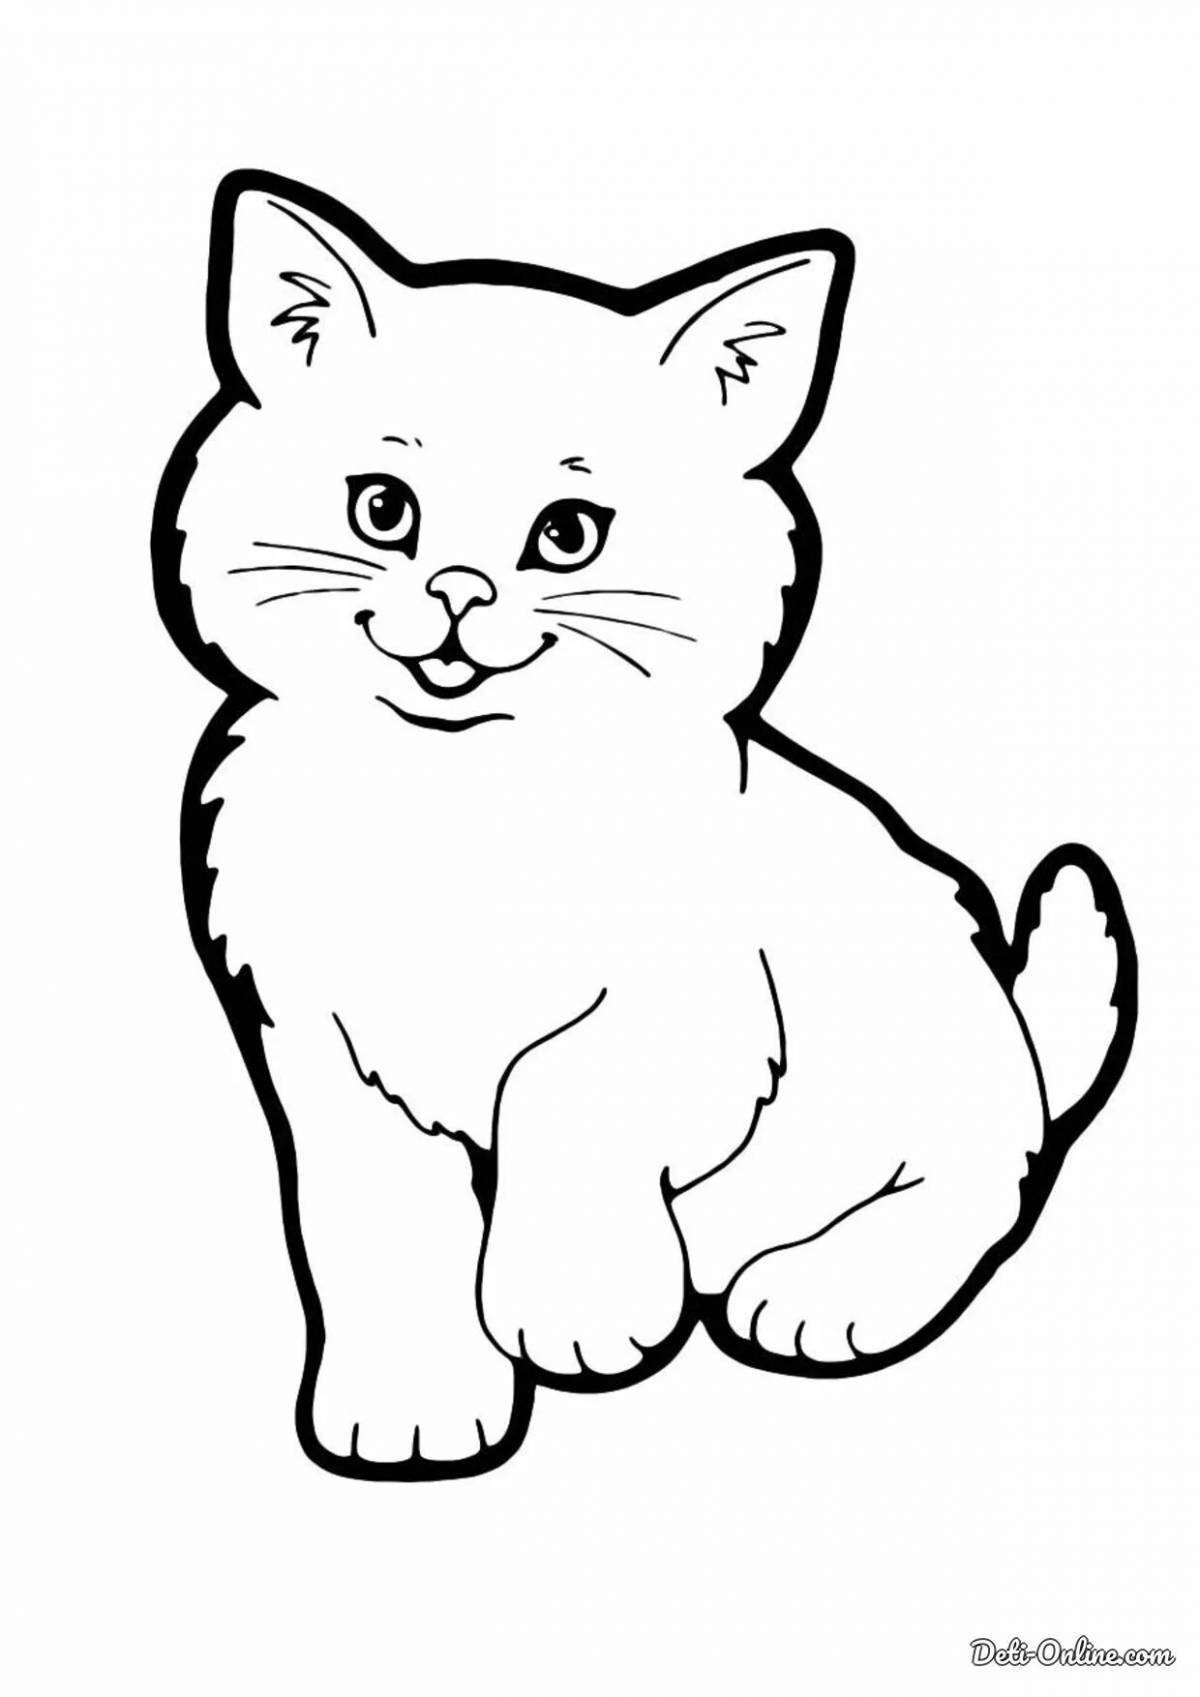 Coloring book cute cat for children 2-3 years old